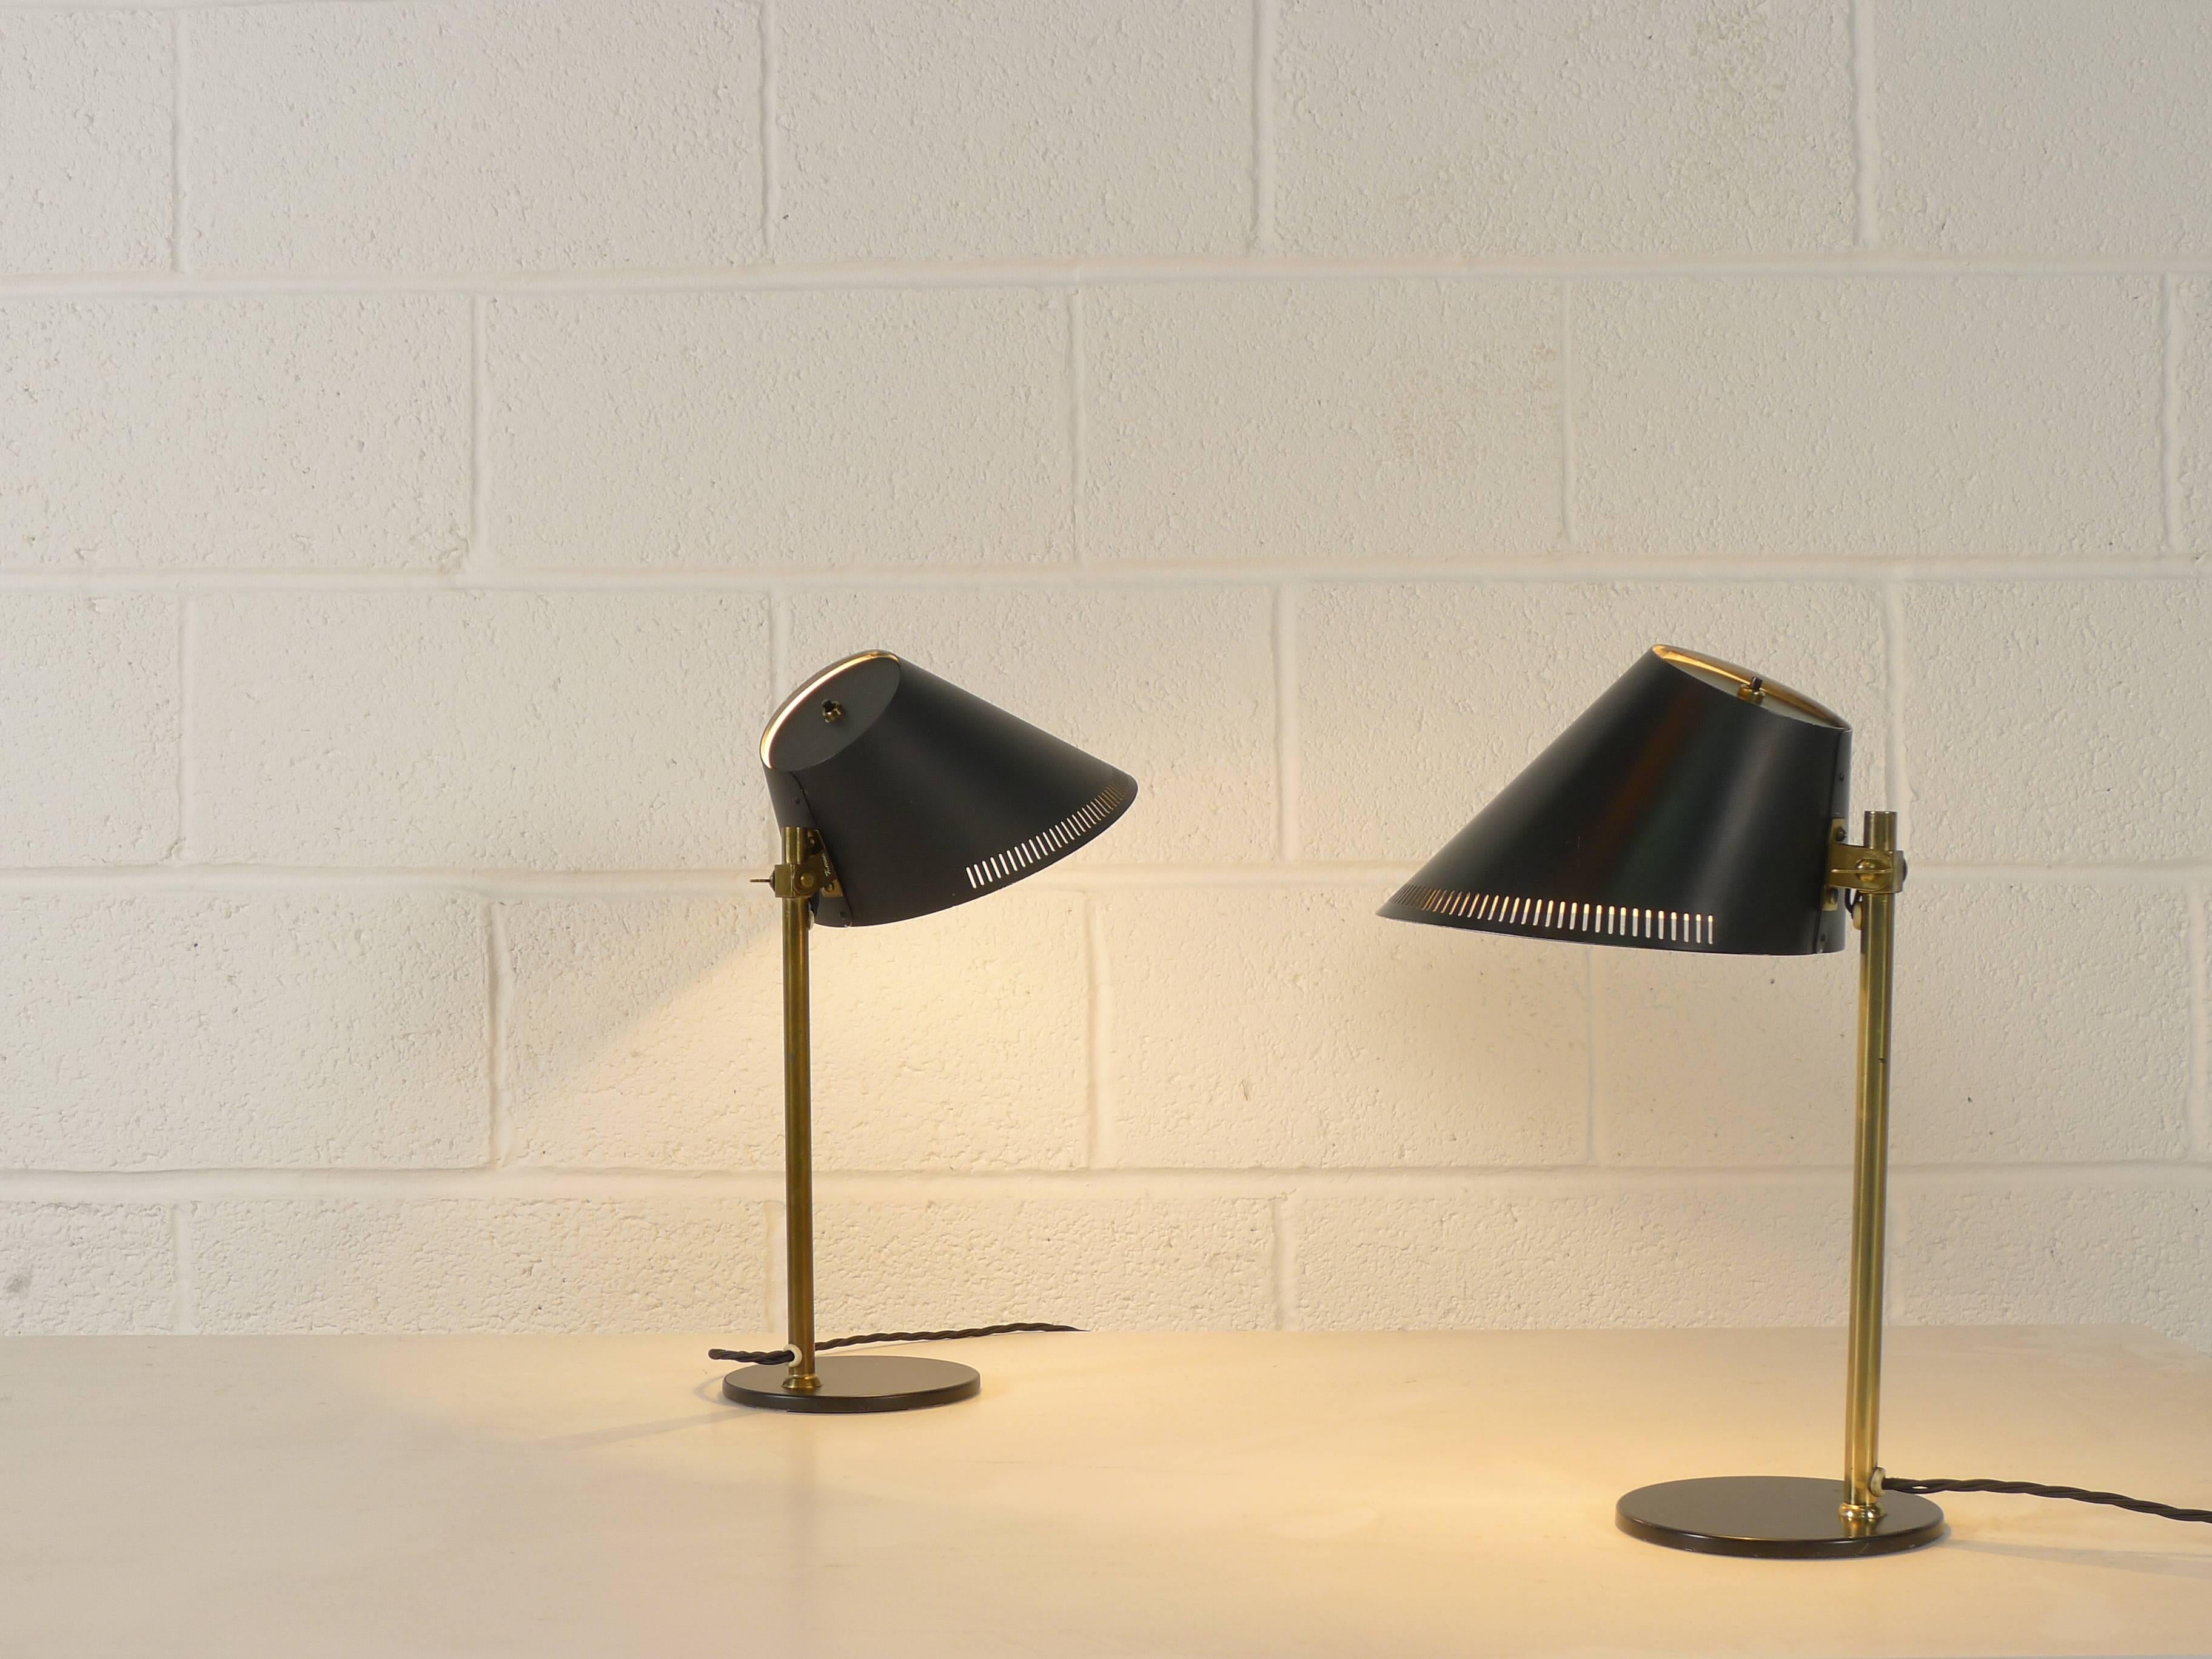 Finnish Paavo Tynell, Pair of Desk Lamps with Black Enamel Shades, Idman Production